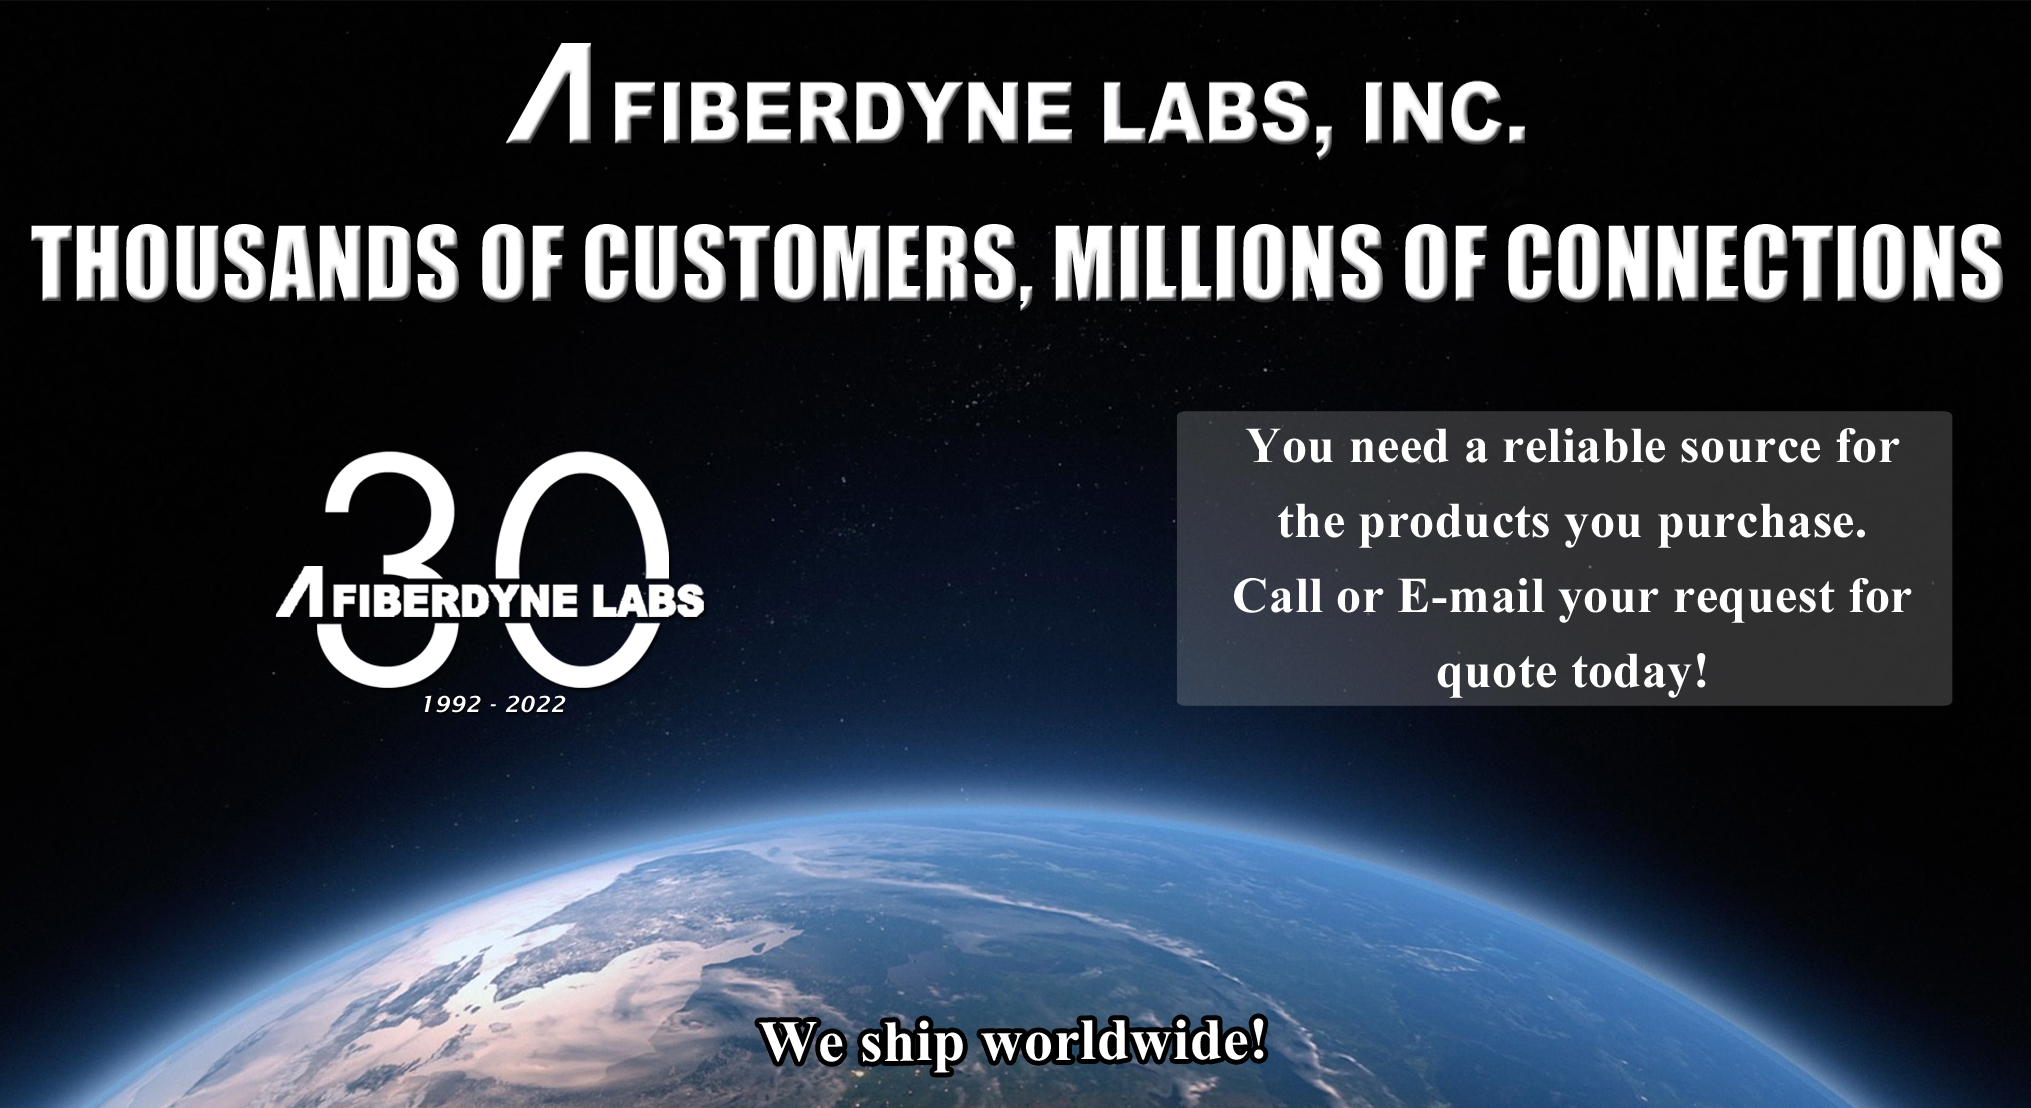 Thousands of Customers, Millions of Connections, we ship worldwide!